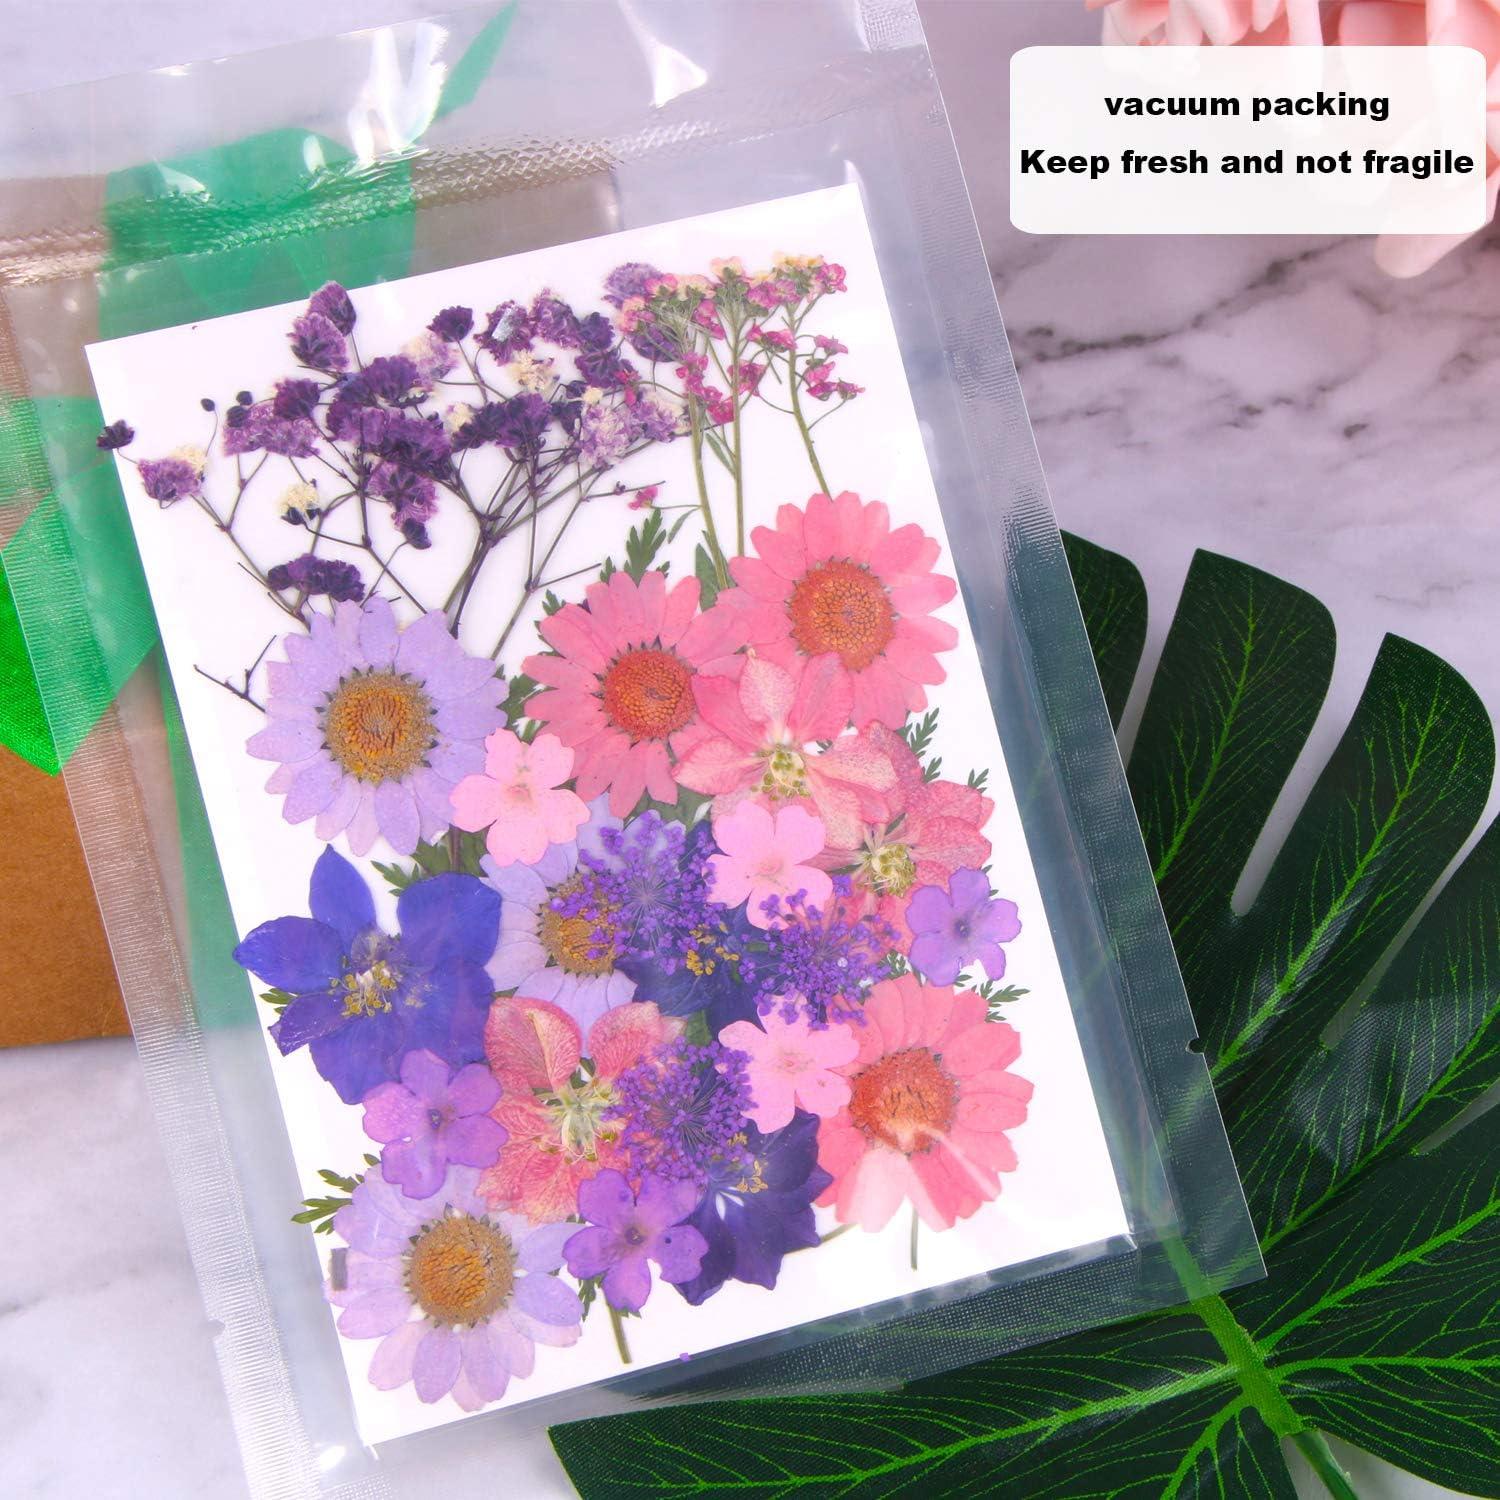 18 Types 37pcs Purple Dried Pressed Flowers for Resin Molds YouthBro Real  Natural Pressed Flowers for DIY Art Crafts Candle Making Nails D cor Soap  Making Phone Case